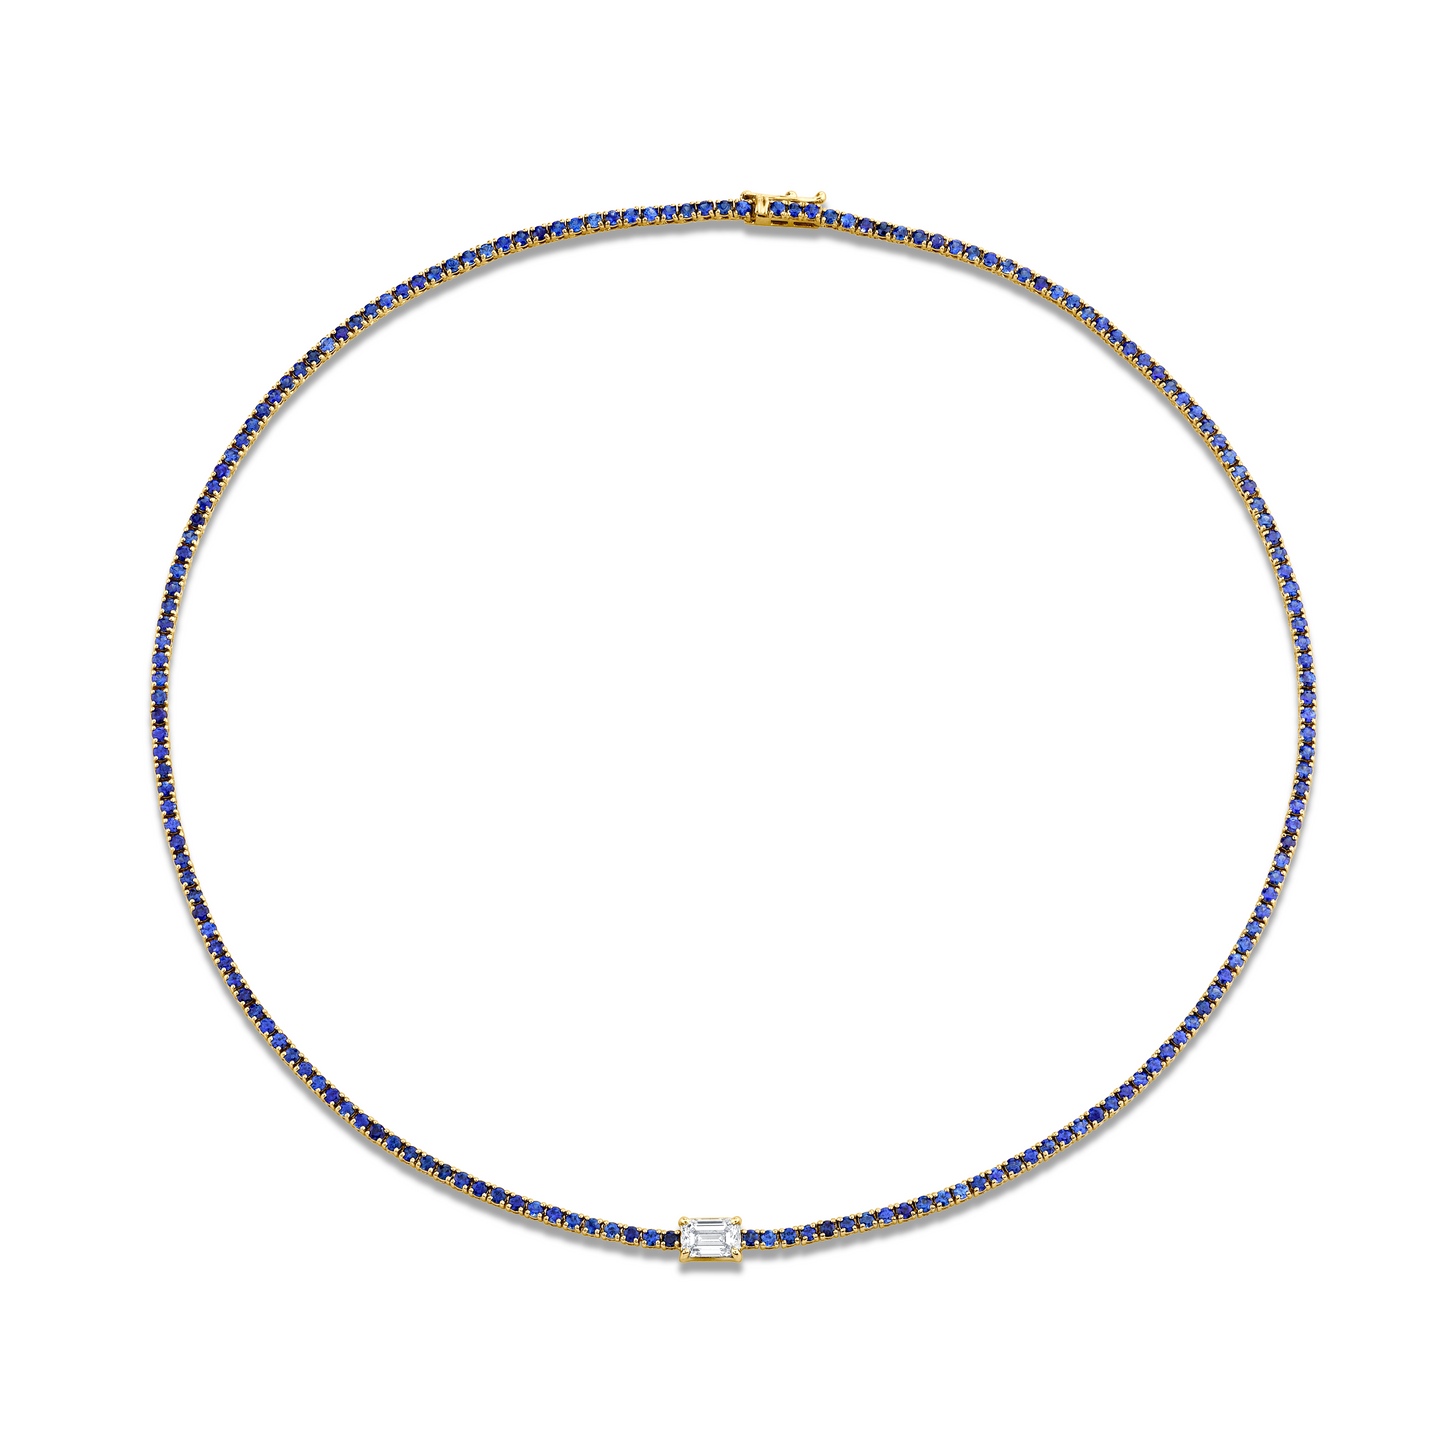 Straight Line Sapphire Necklace with Diamond Accent